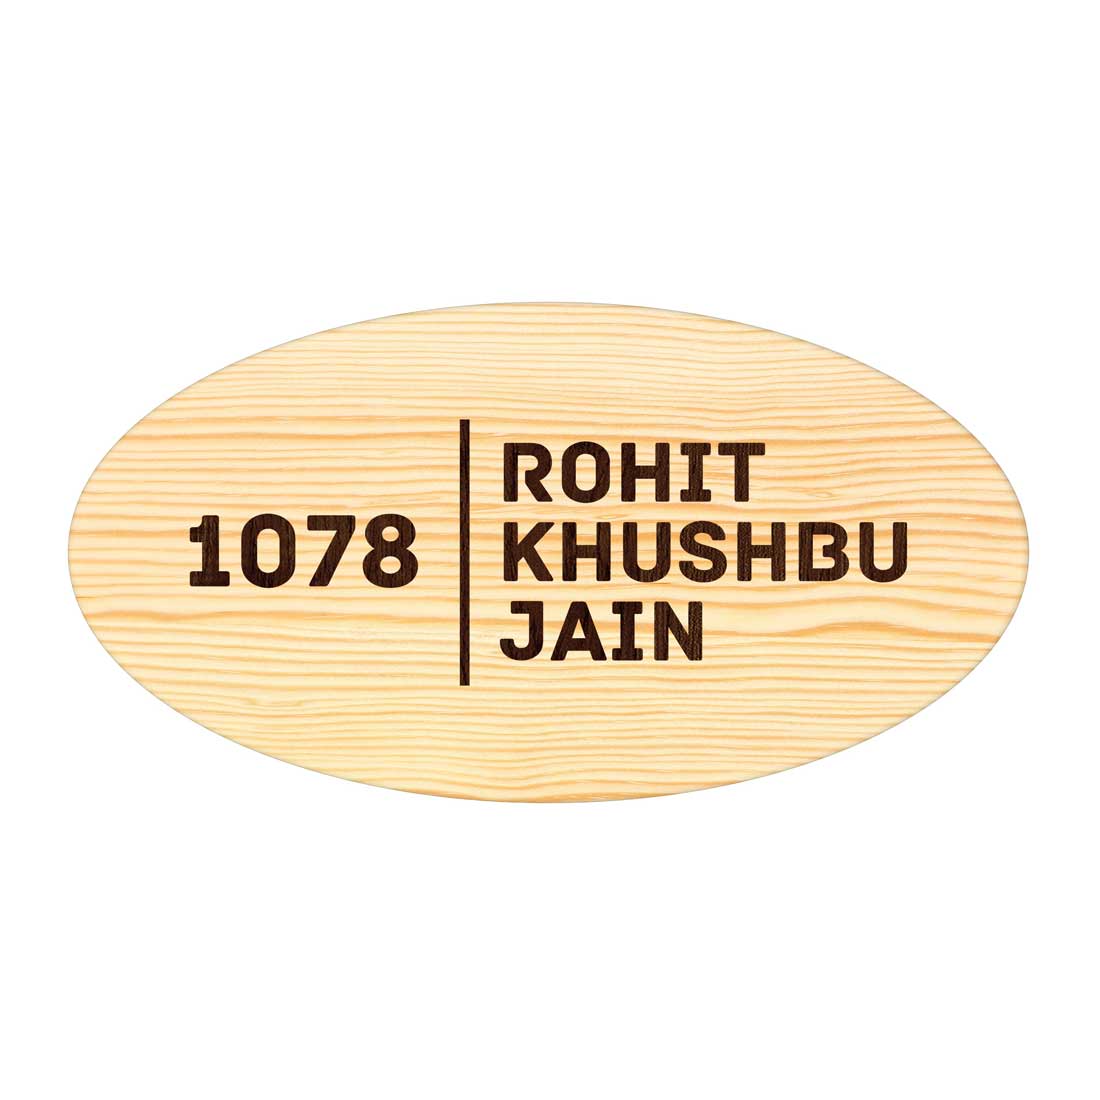 Personalized Wooden Name Plate for Home Office